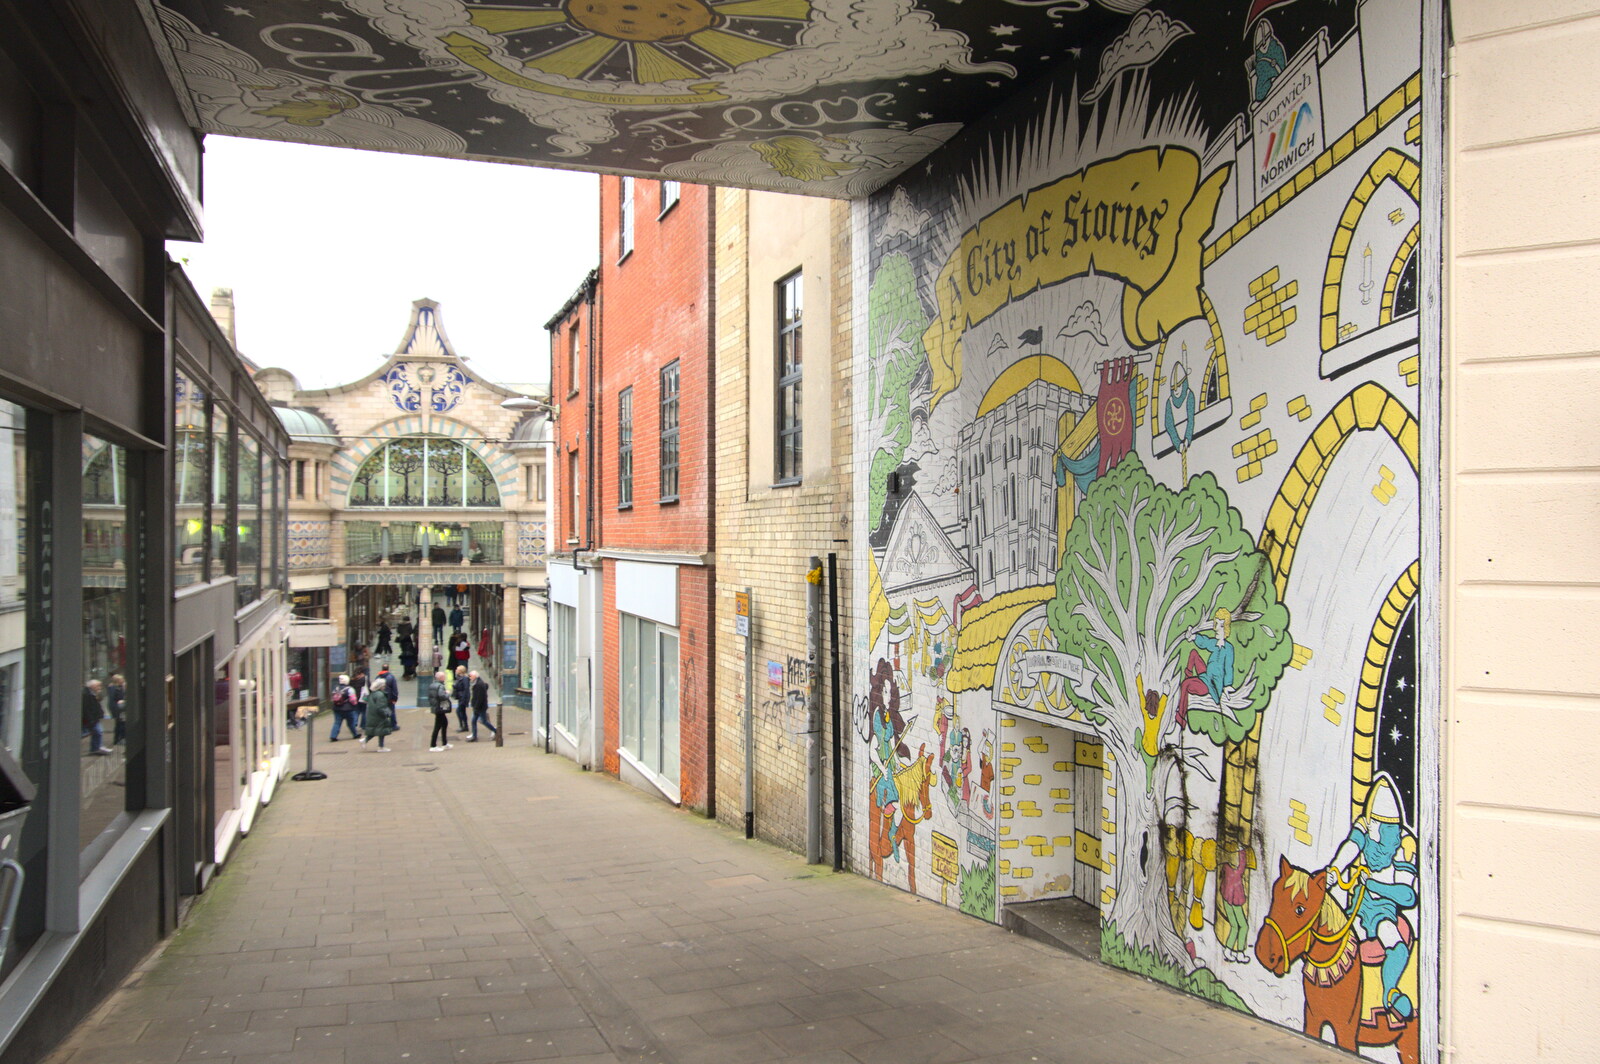 The City of Stories wall art off Castle Meadow from The Lost Pubs of Norwich, Norfolk - 13th February 2022